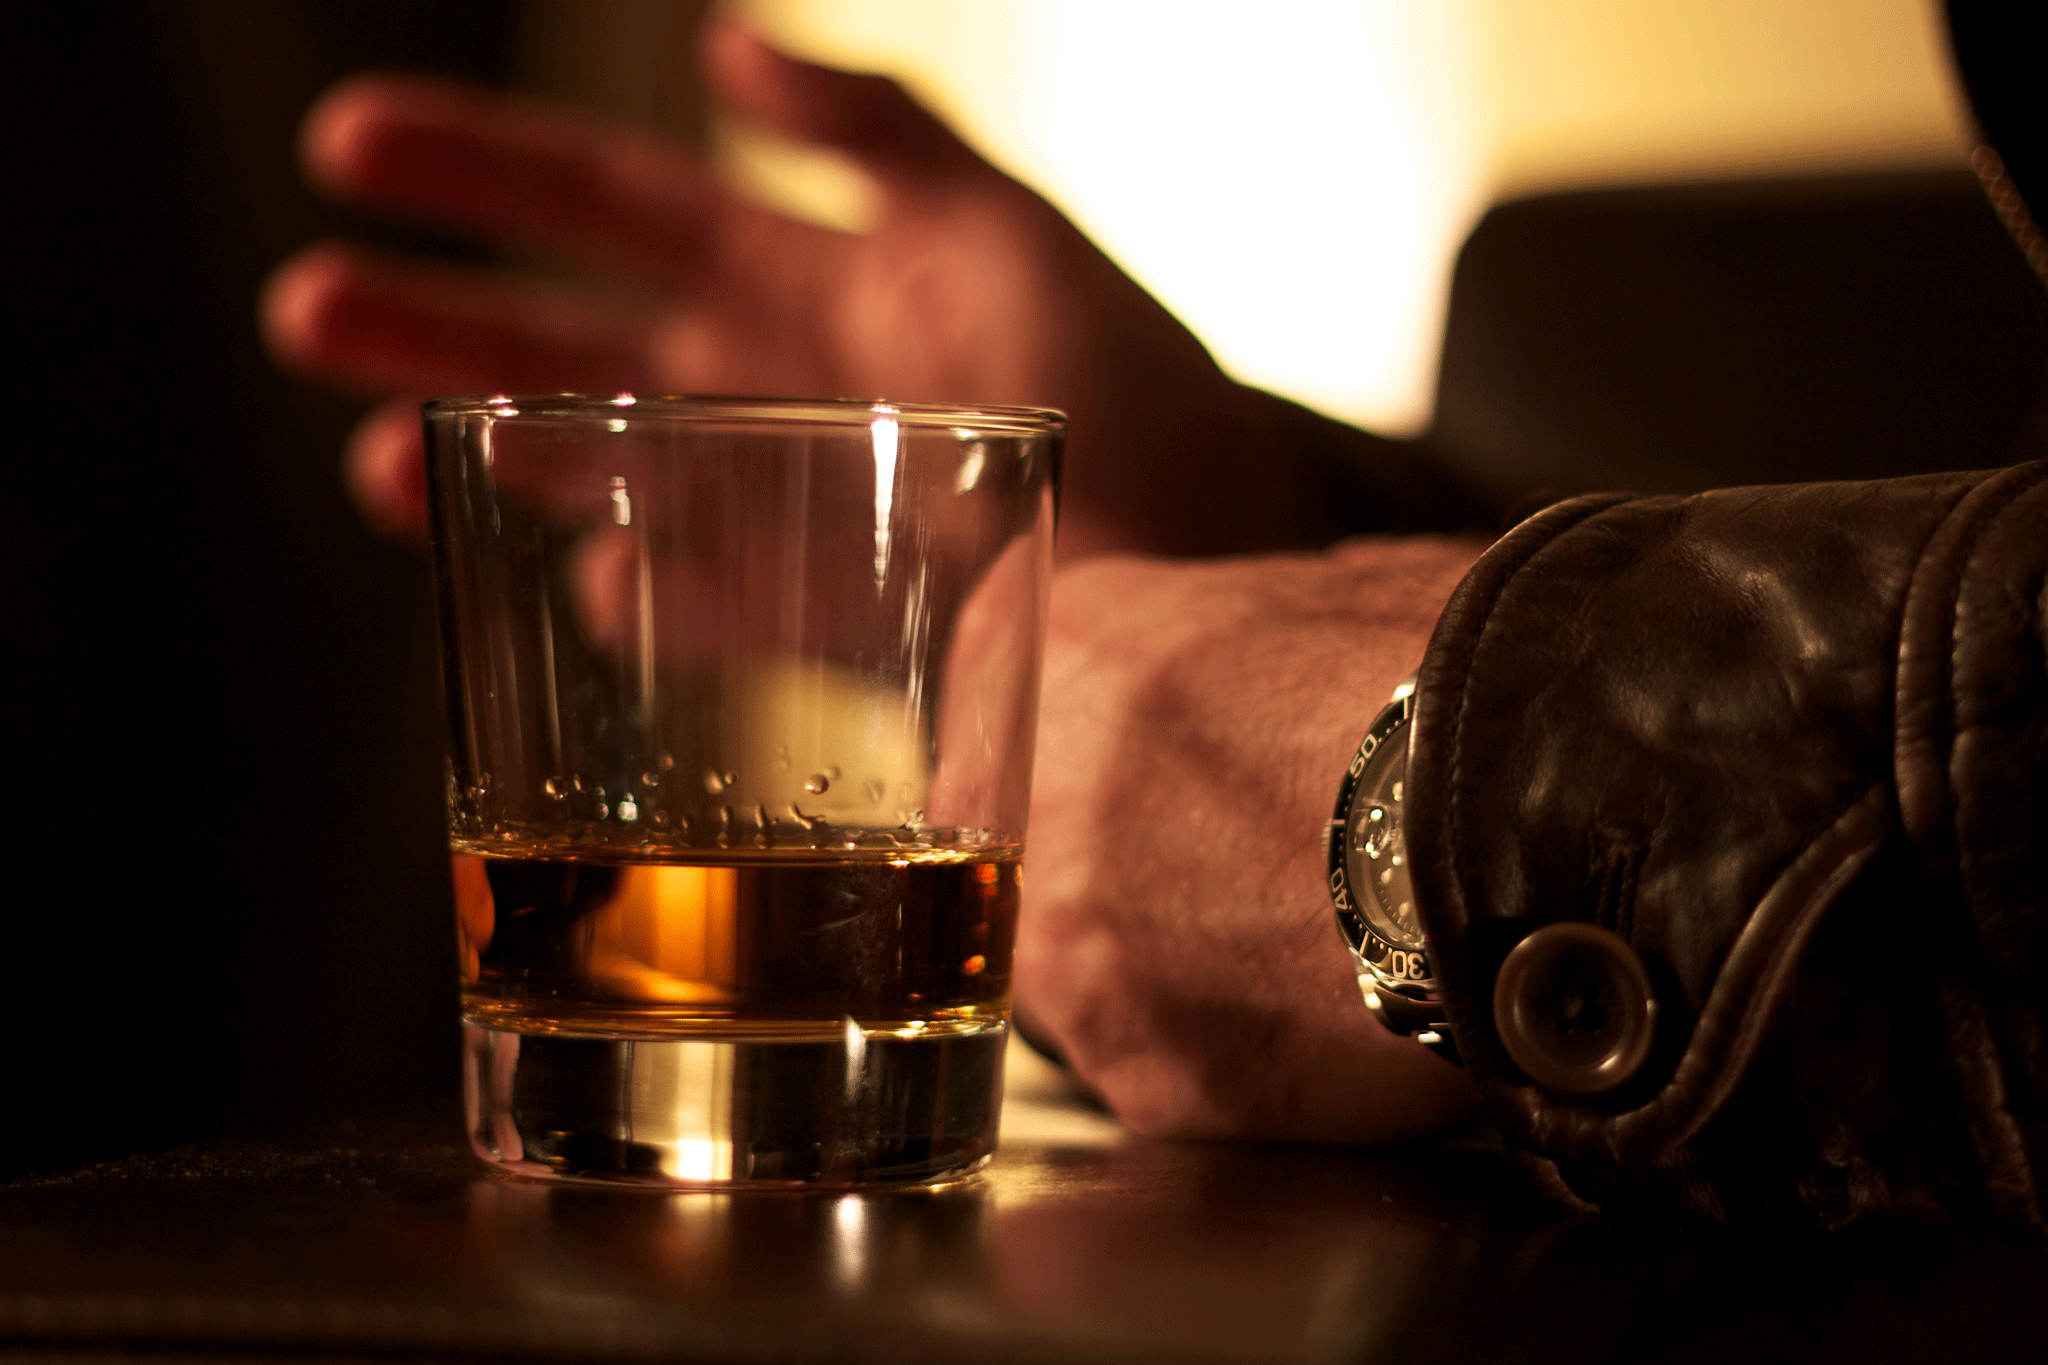 Whiskey has come out of dads' dusty liquor cabinets and into bars